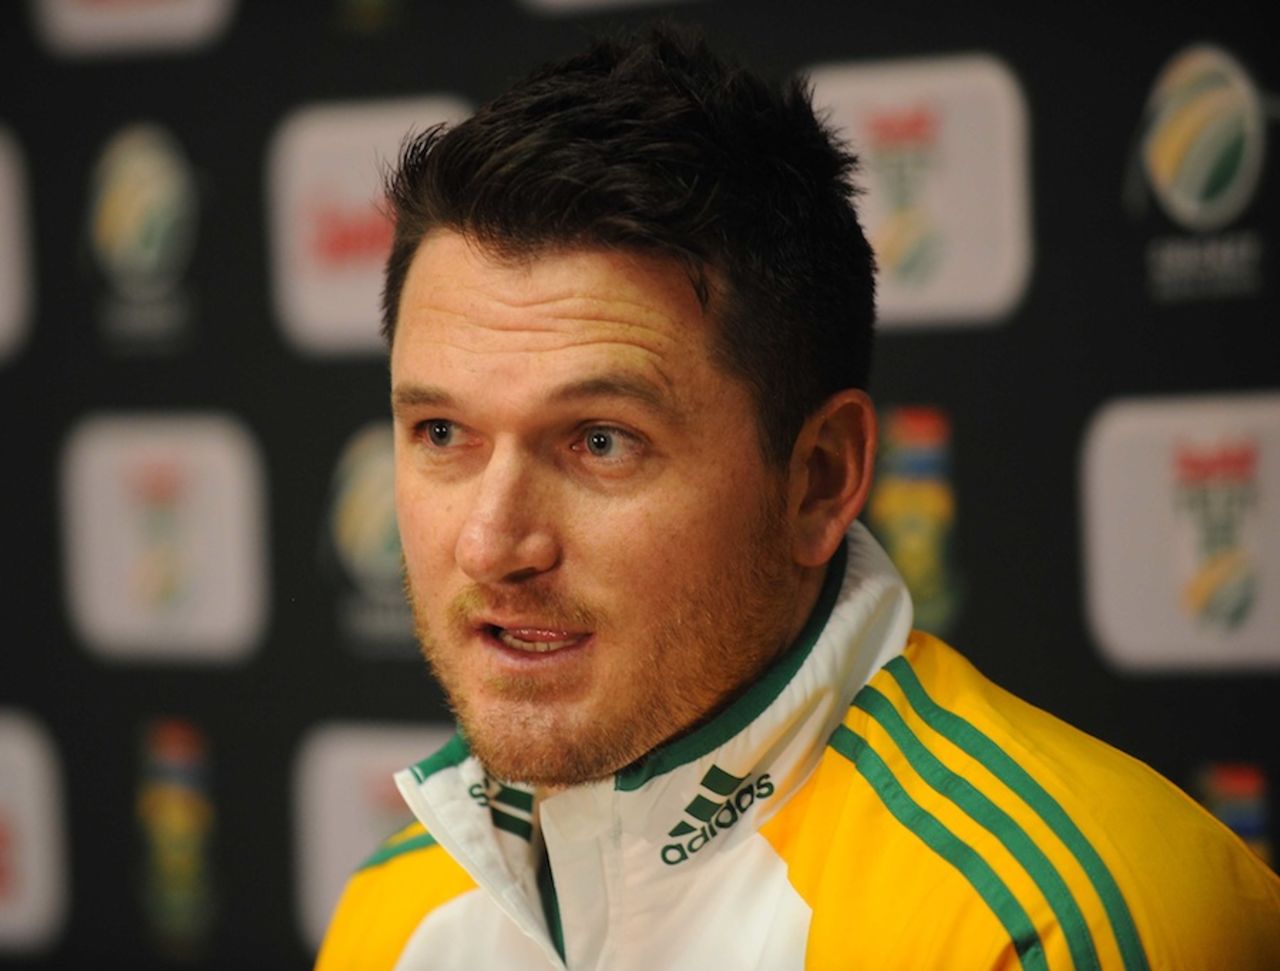 Graeme Smith at a press conference on the eve of the Test against Sri Lanka, Centurion, December 14, 2011